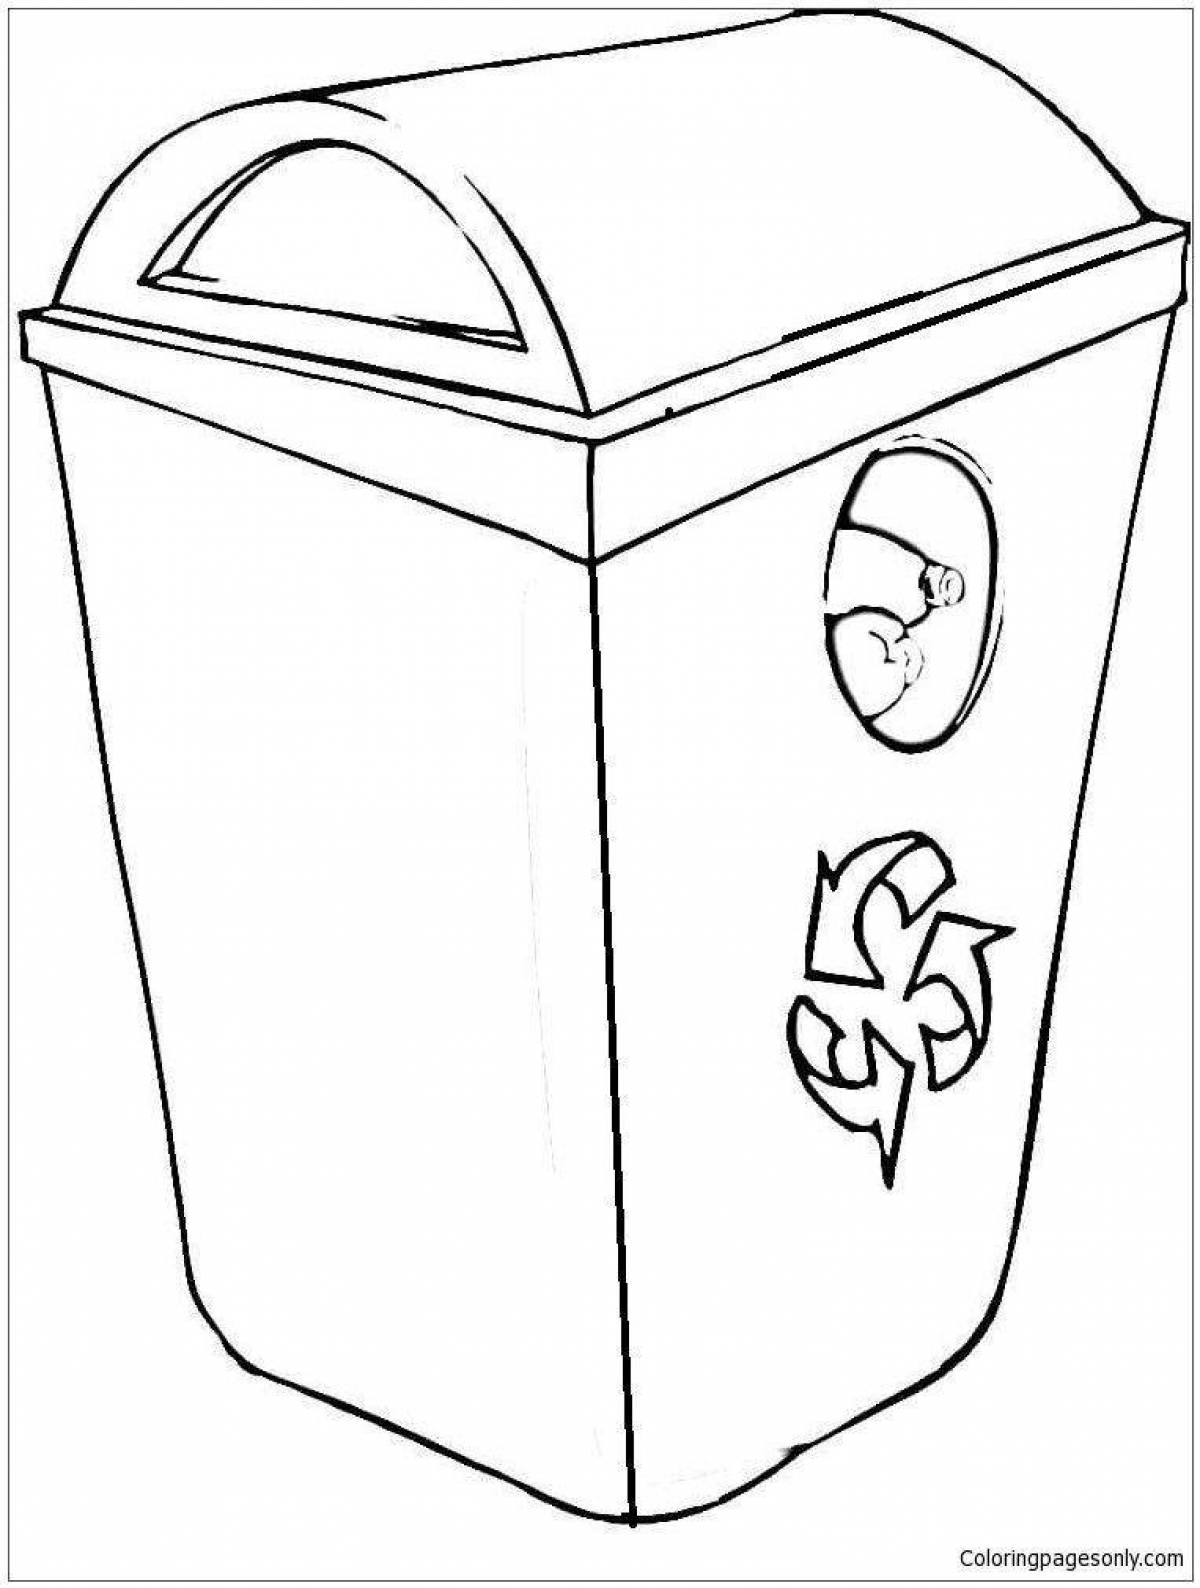 Awesome trash can coloring page